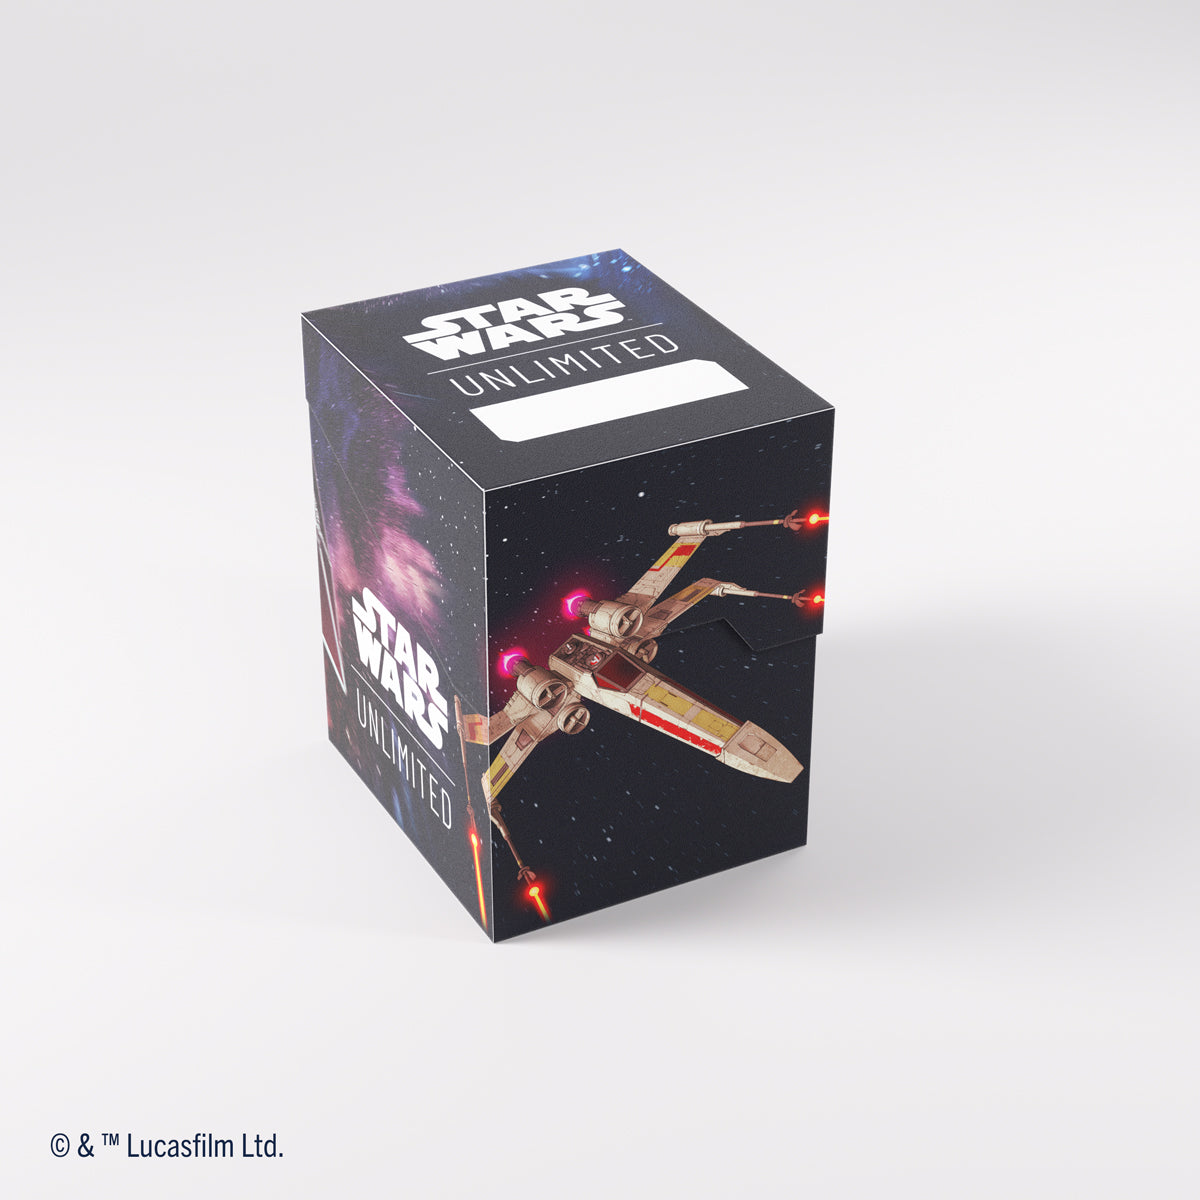 Gamegenic Soft Crate - Star Wars Unlimited